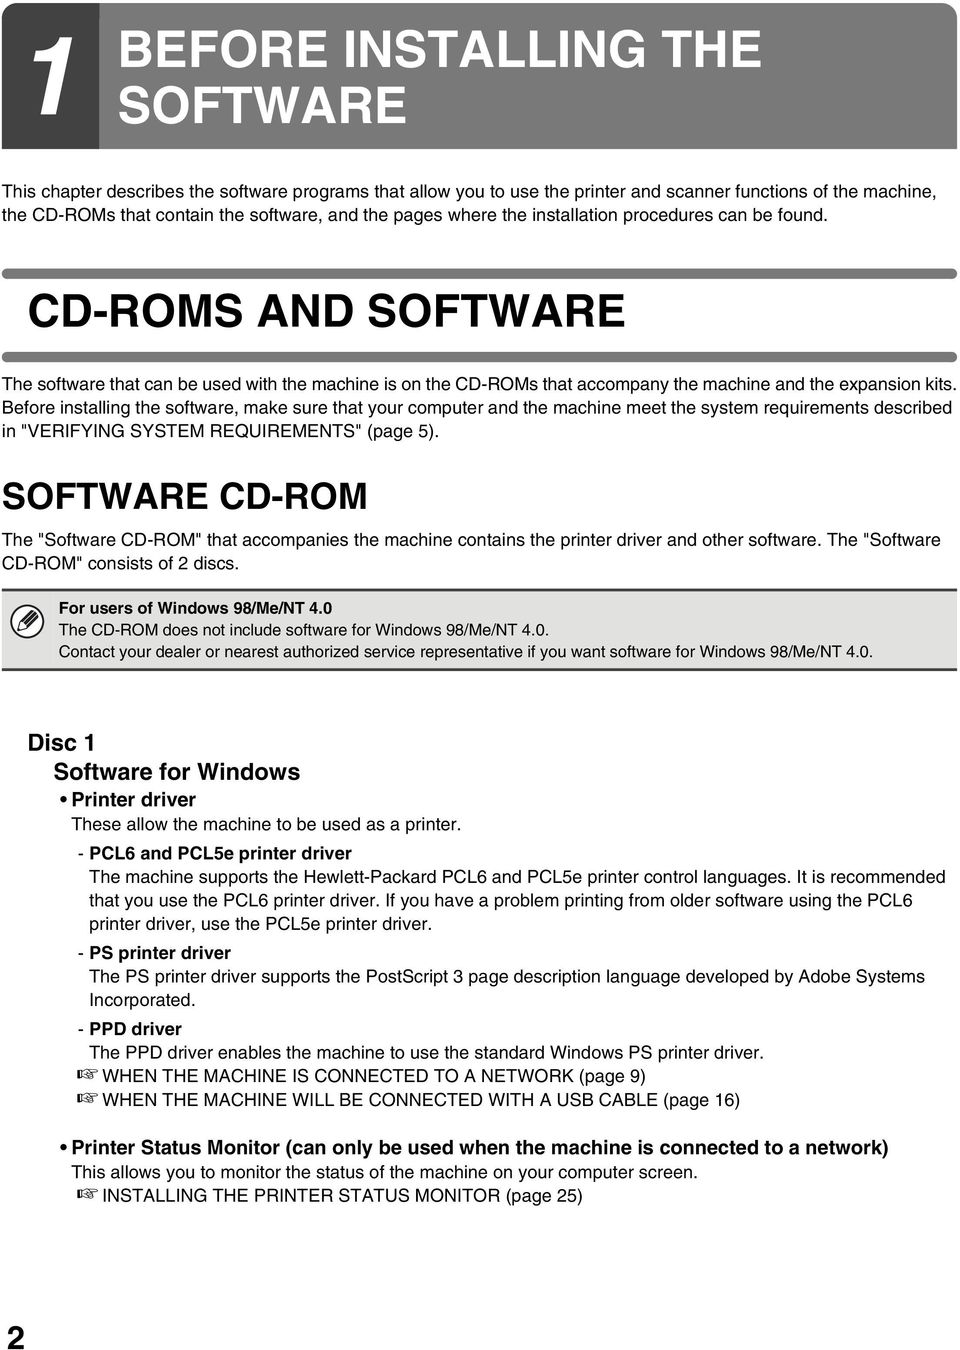 Before installing the software, make sure that your computer and the machine meet the system requirements described in "VERIFYING SYSTEM REQUIREMENTS" (page 5).